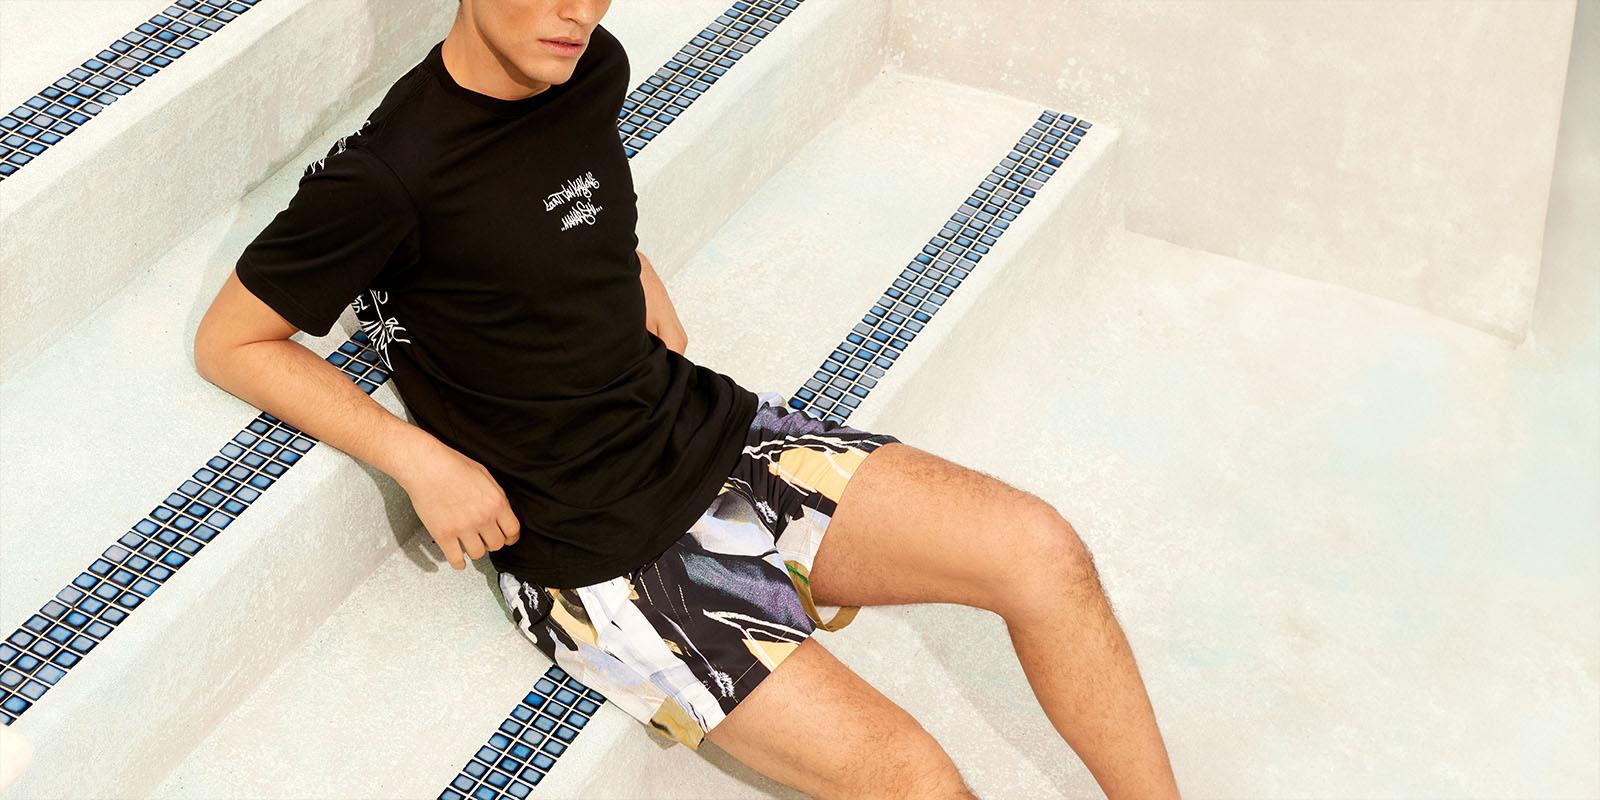 Man sitting in an empty pool with summer outfit on